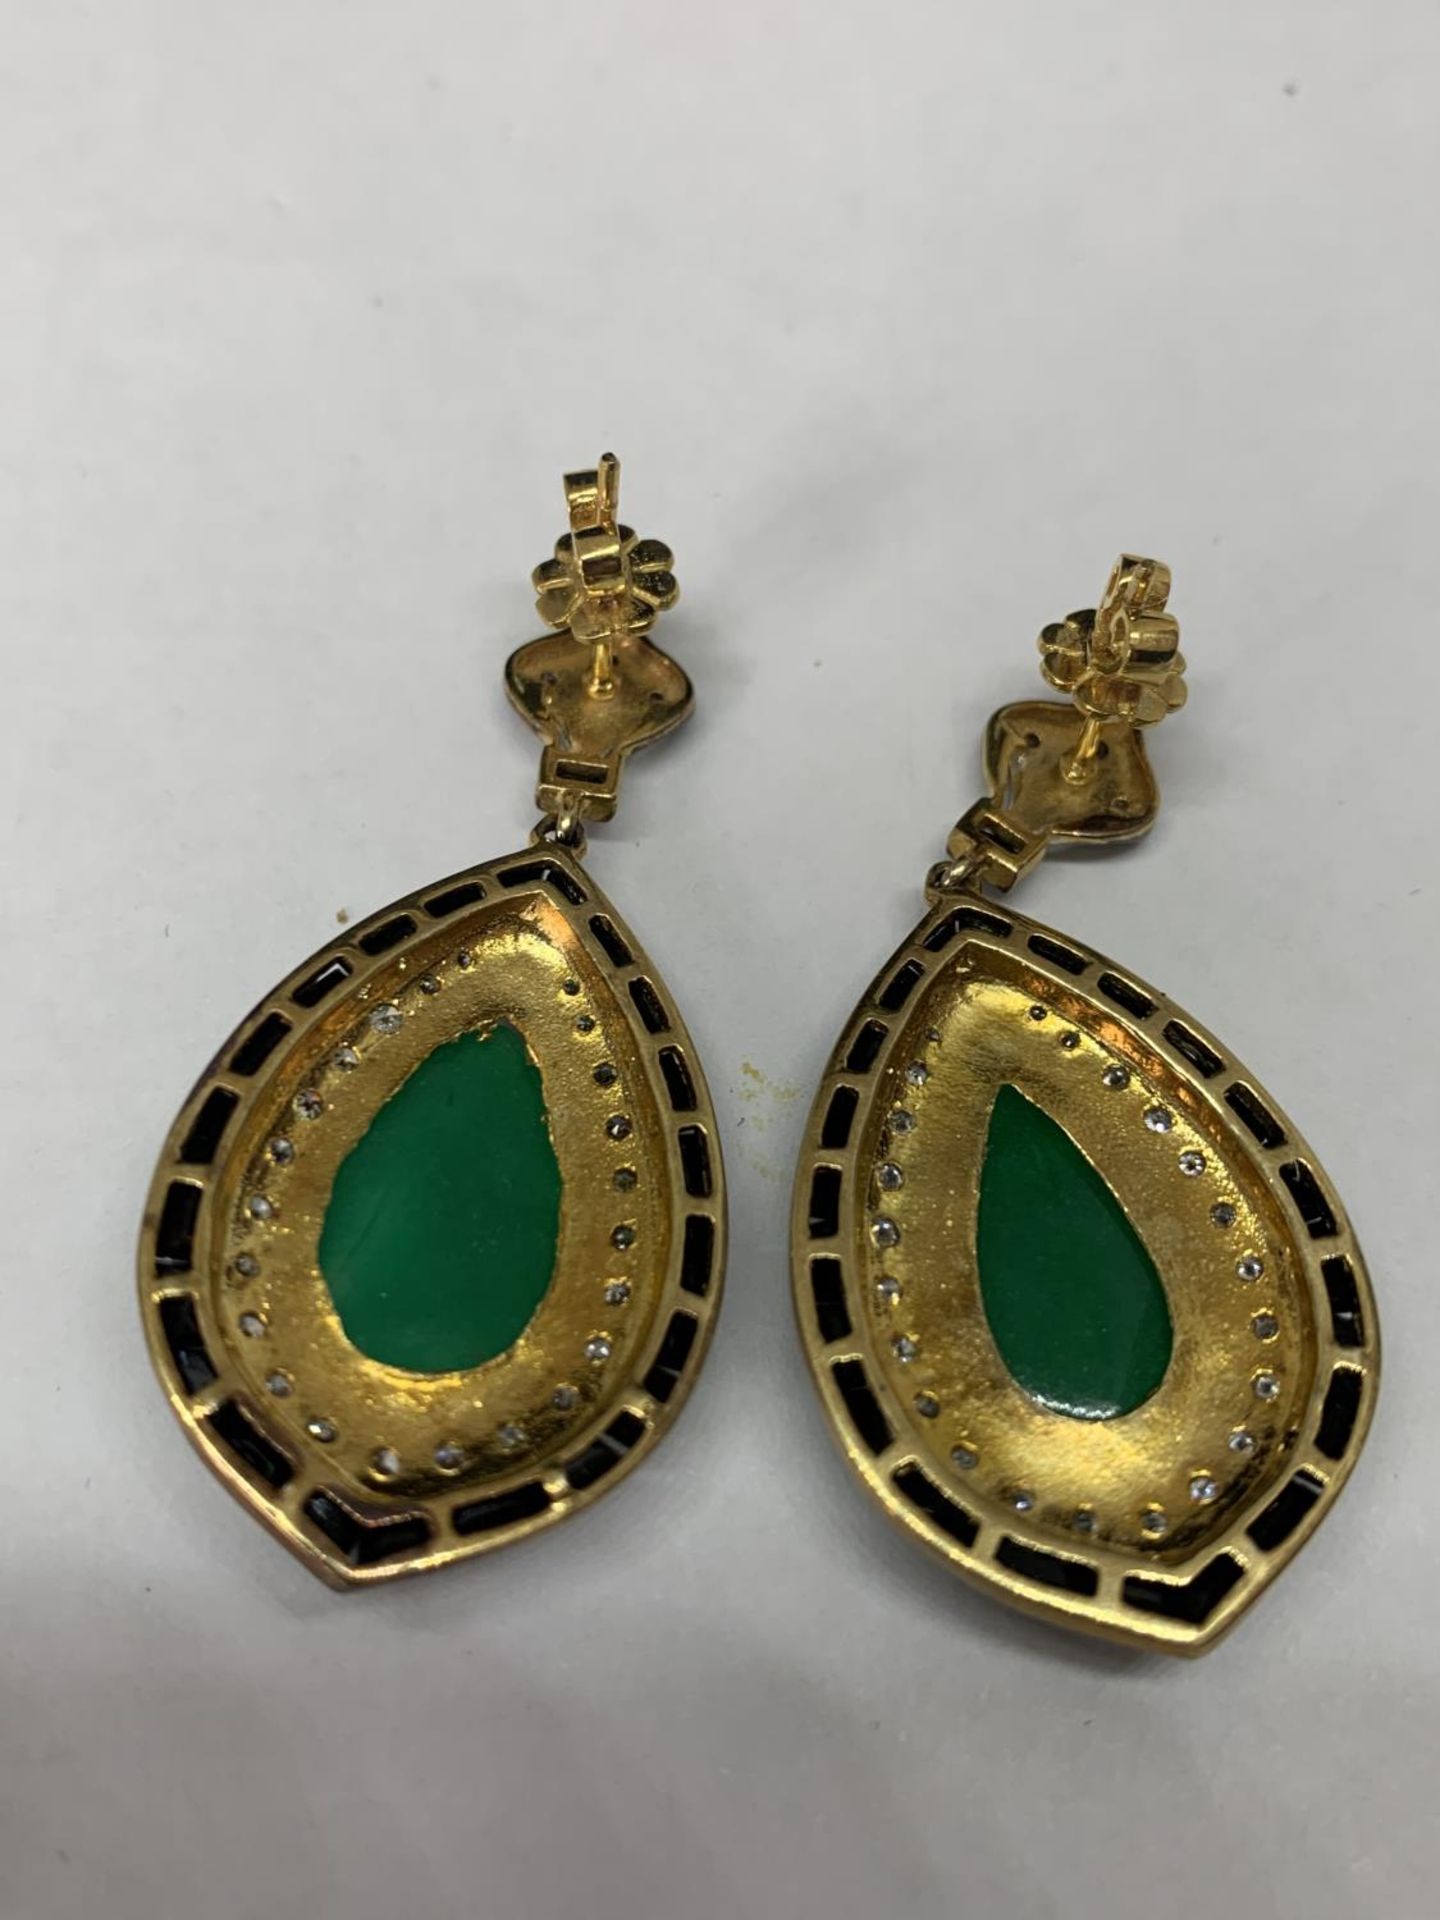 A PAIR OF JADE ON BLACK ONYX EARRINGS WITH DIAMOND SURROUND AND YELLOW AND WHITE METAL - Image 4 of 4